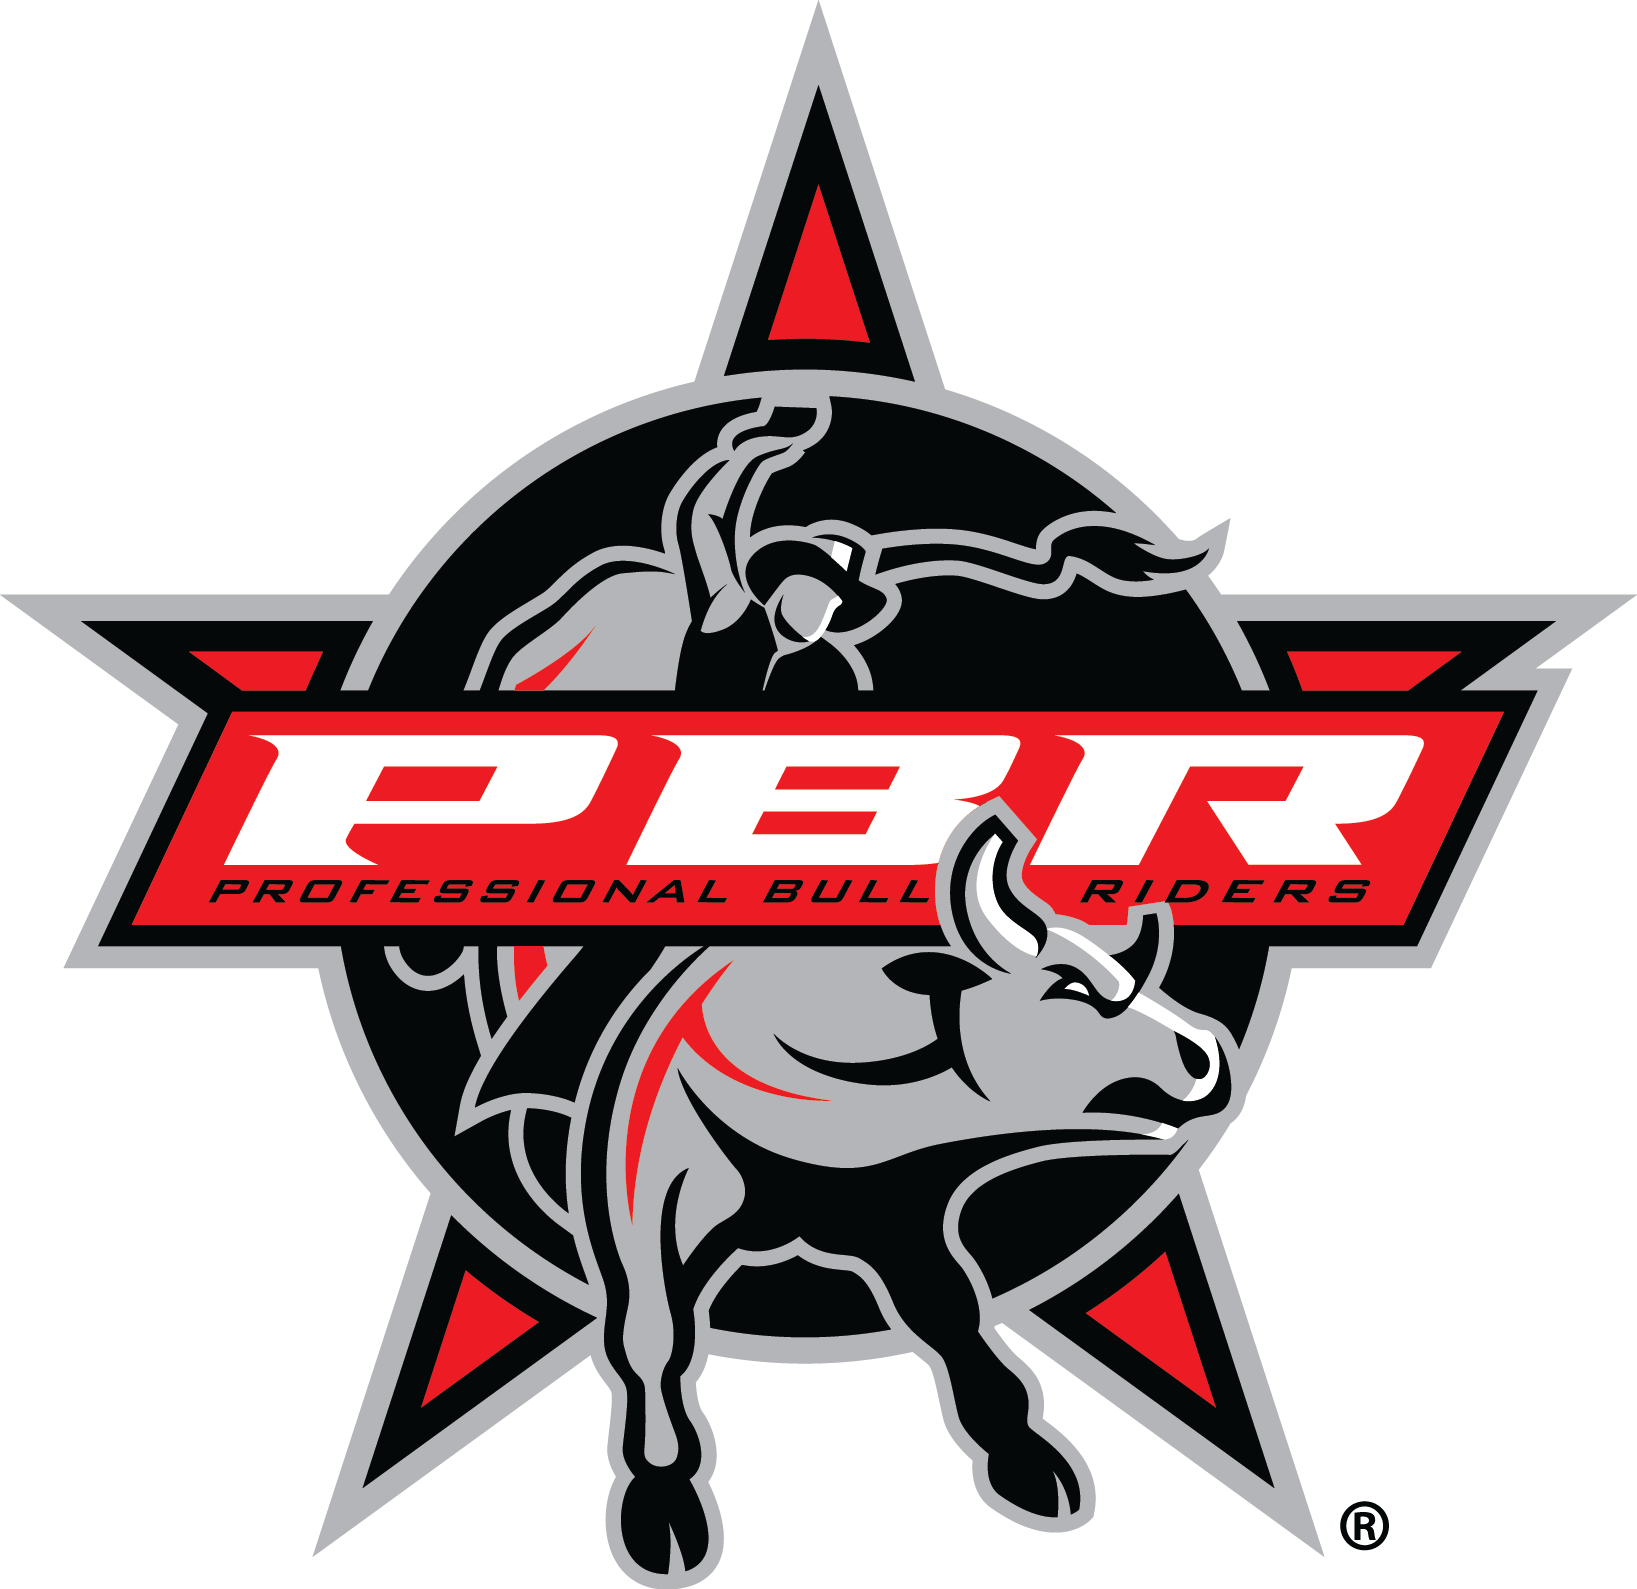 Pbr Action In Colorado Springs, Co This Weekend May - Professional Bull Riders (1637x1589)